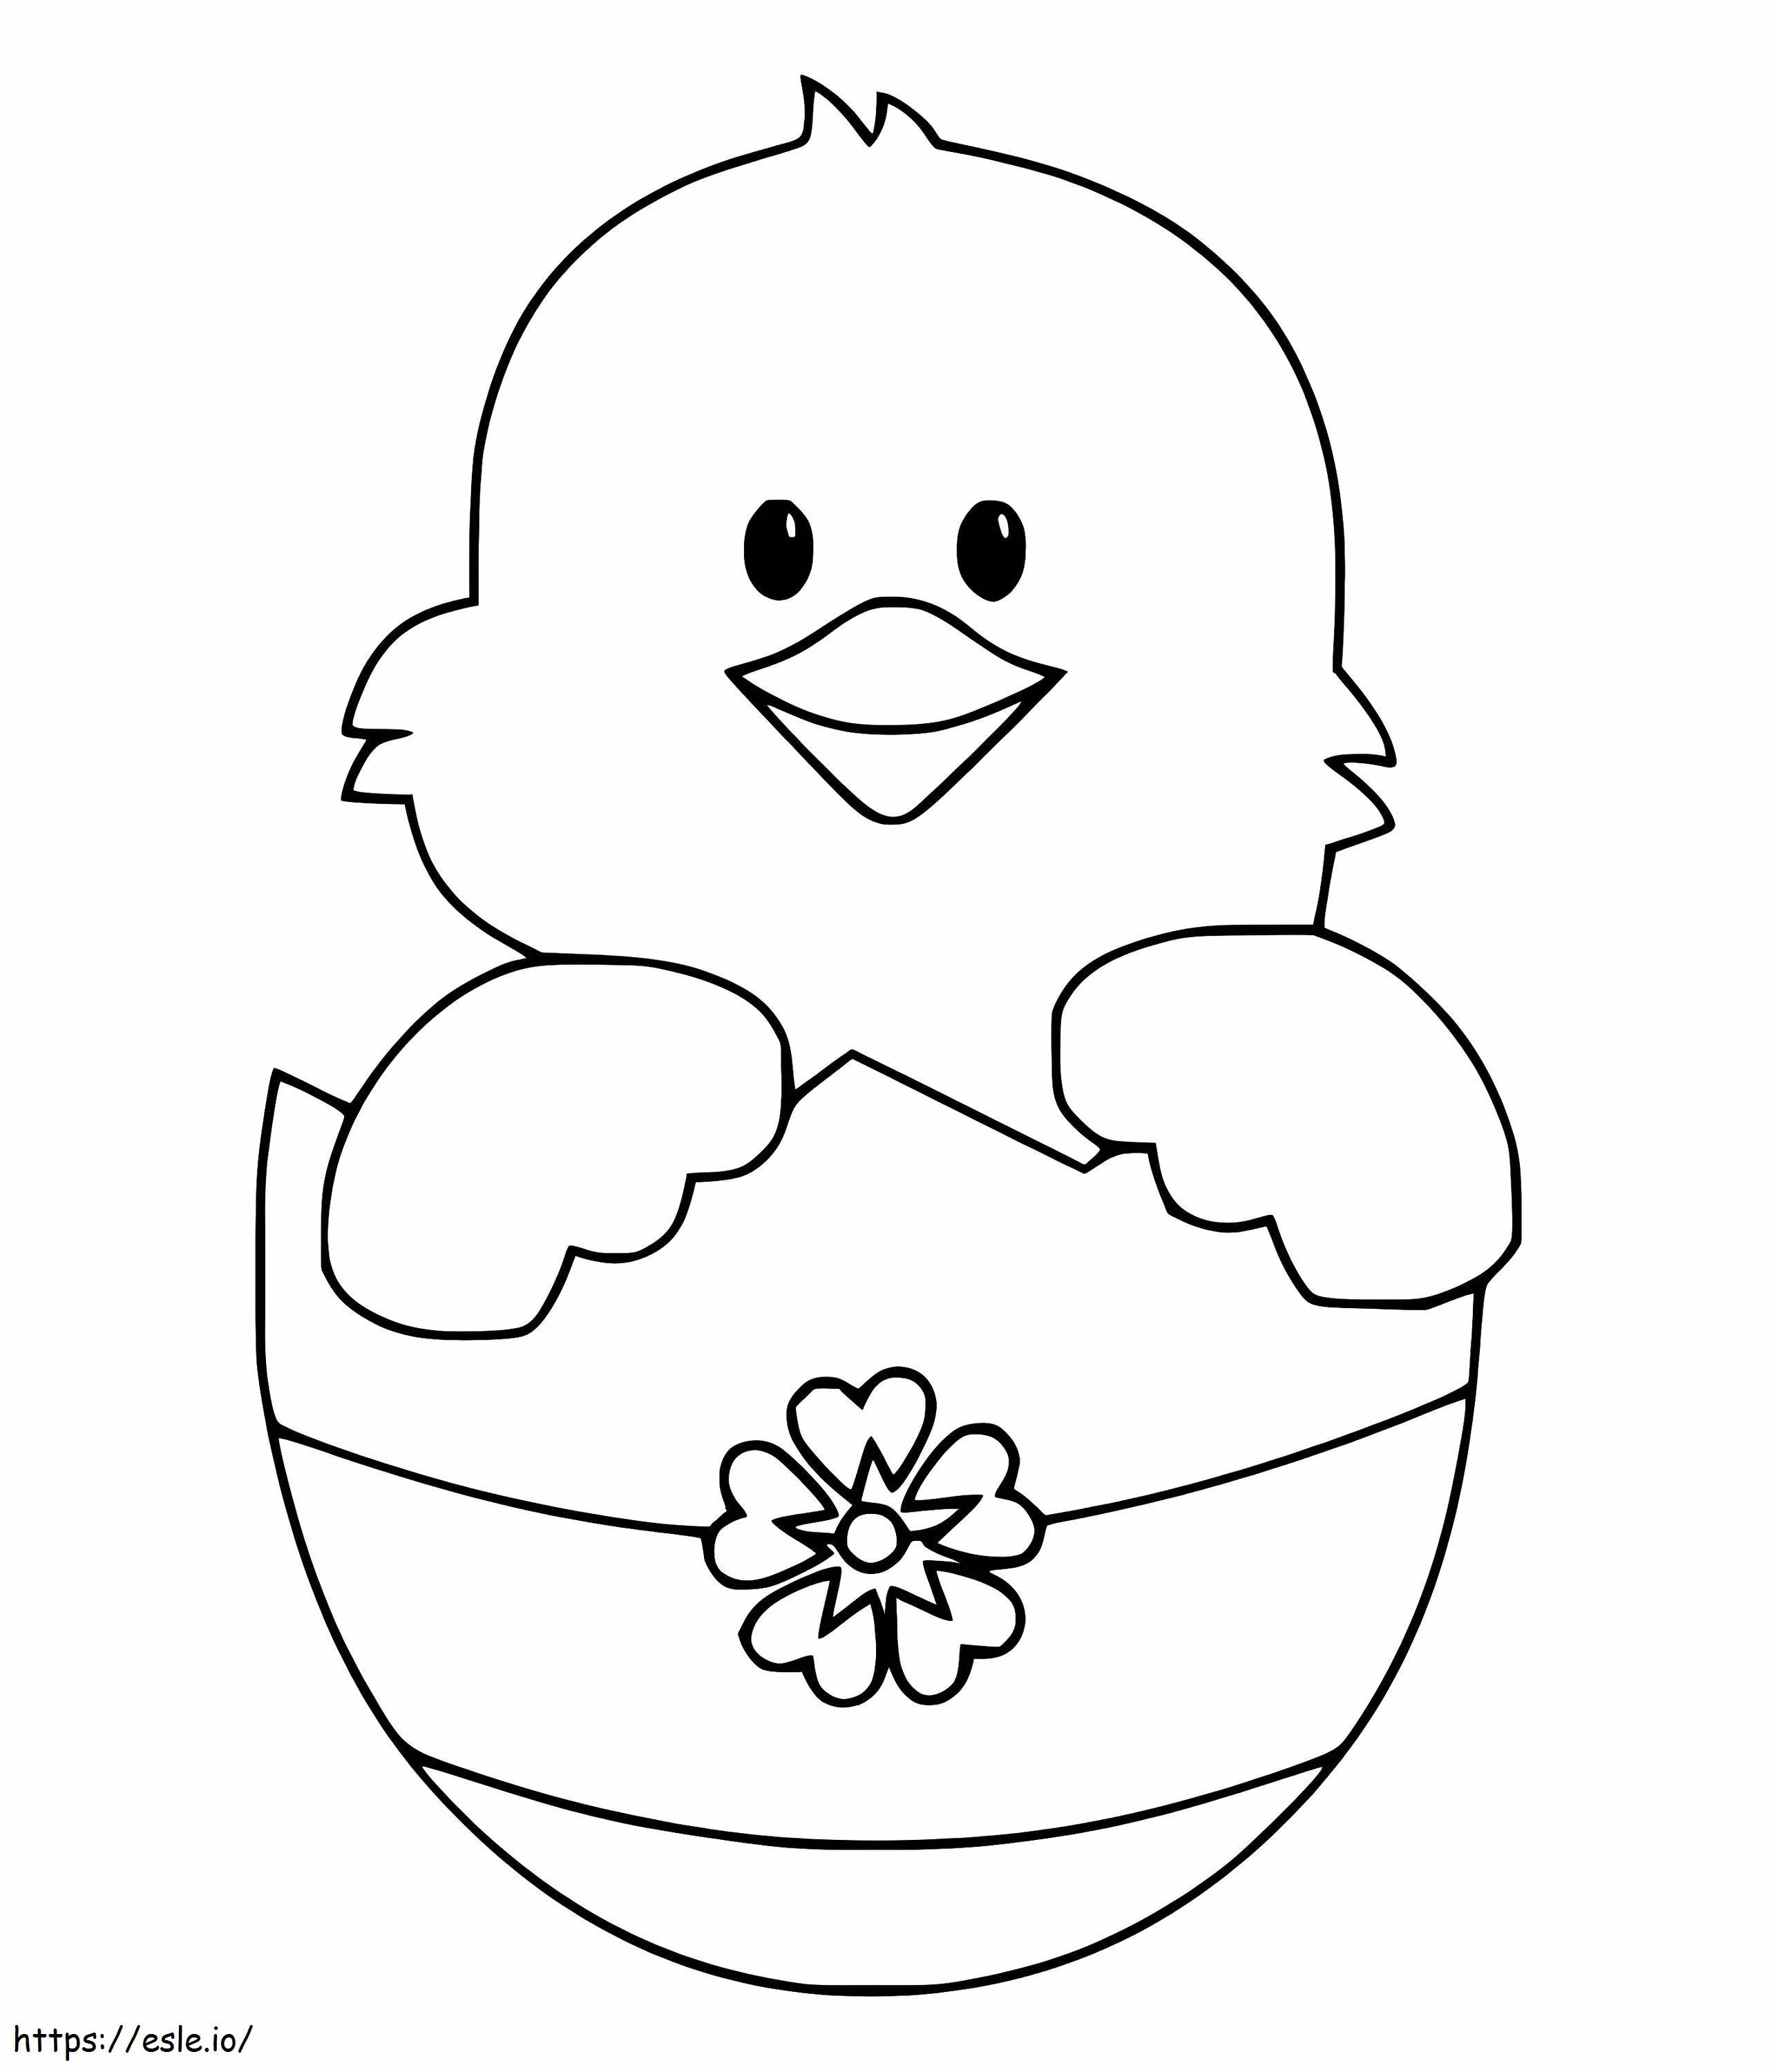 Cute Easter Chick coloring page